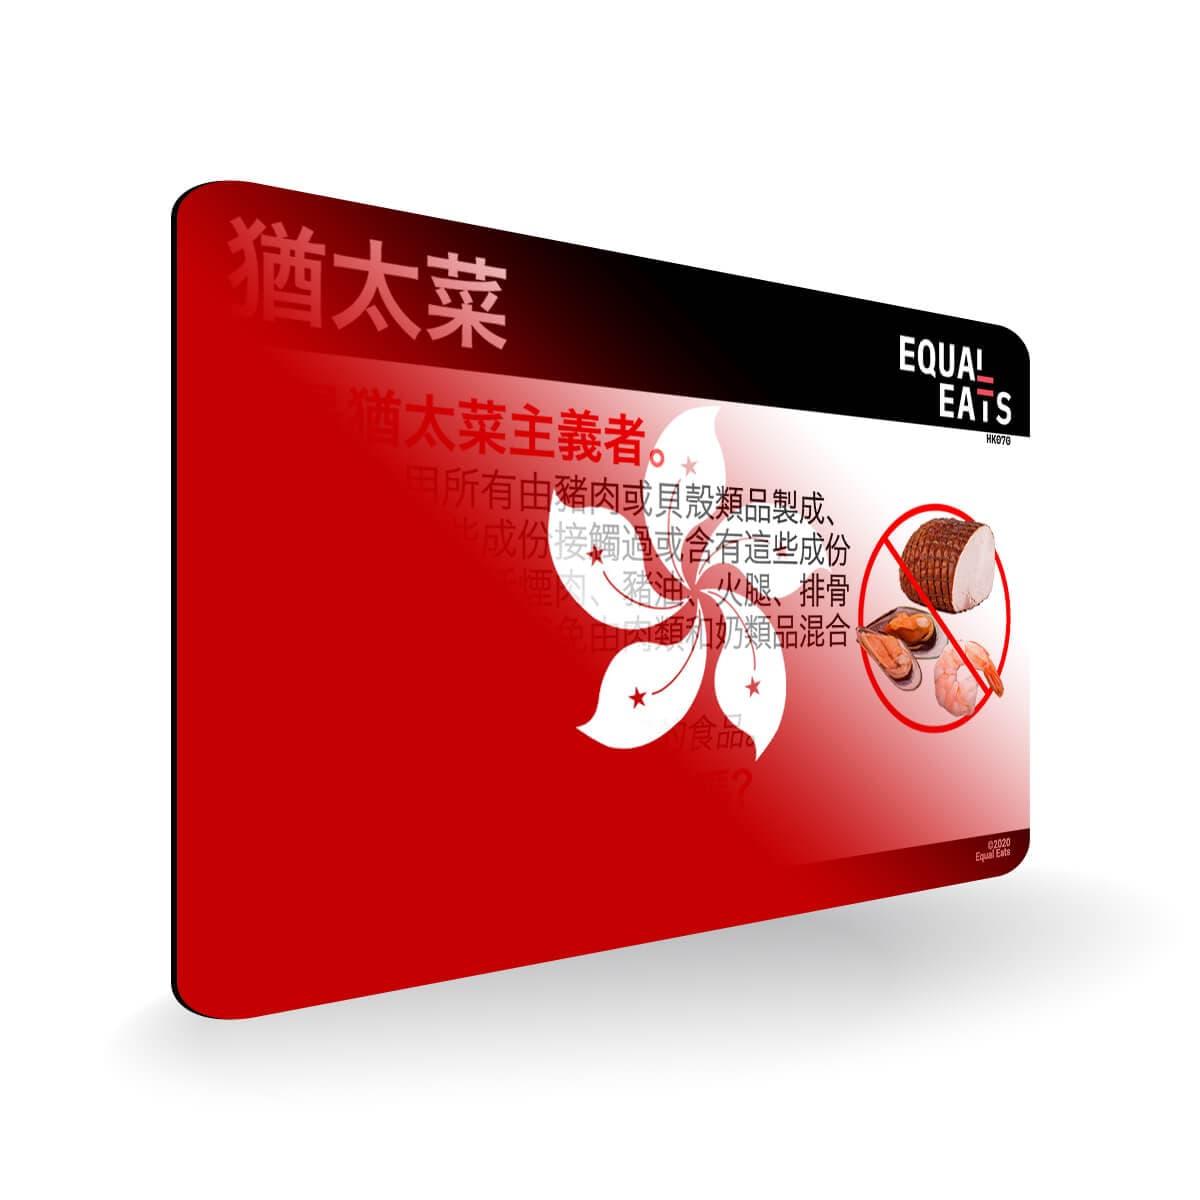 Kosher Diet in Traditional Chinese. Kosher Card for Hong Kong